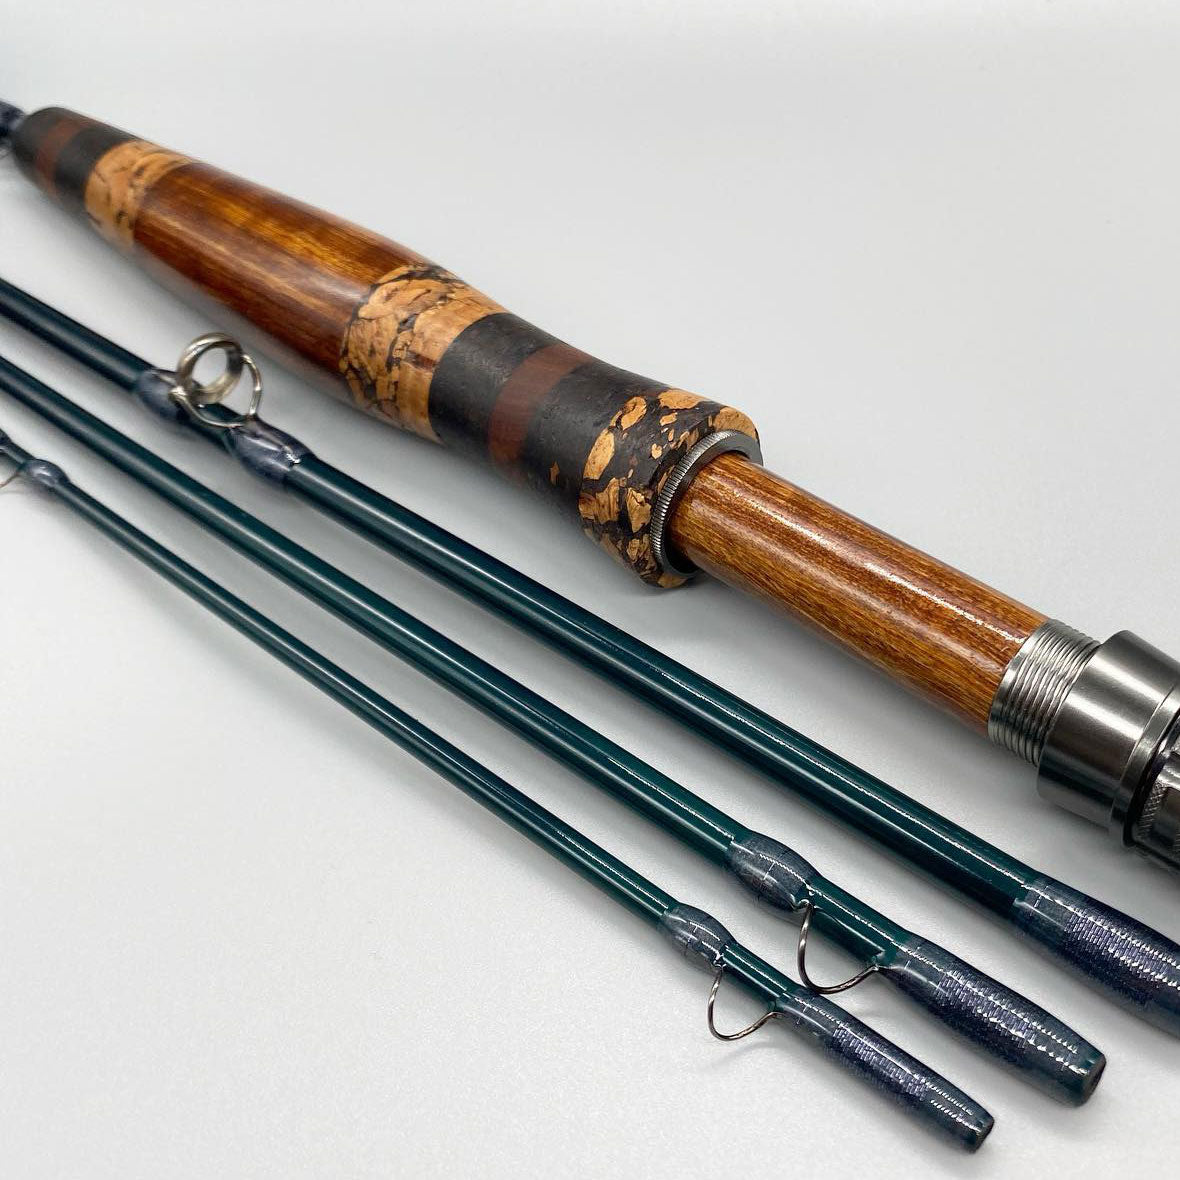 New Fishing Rod Guides